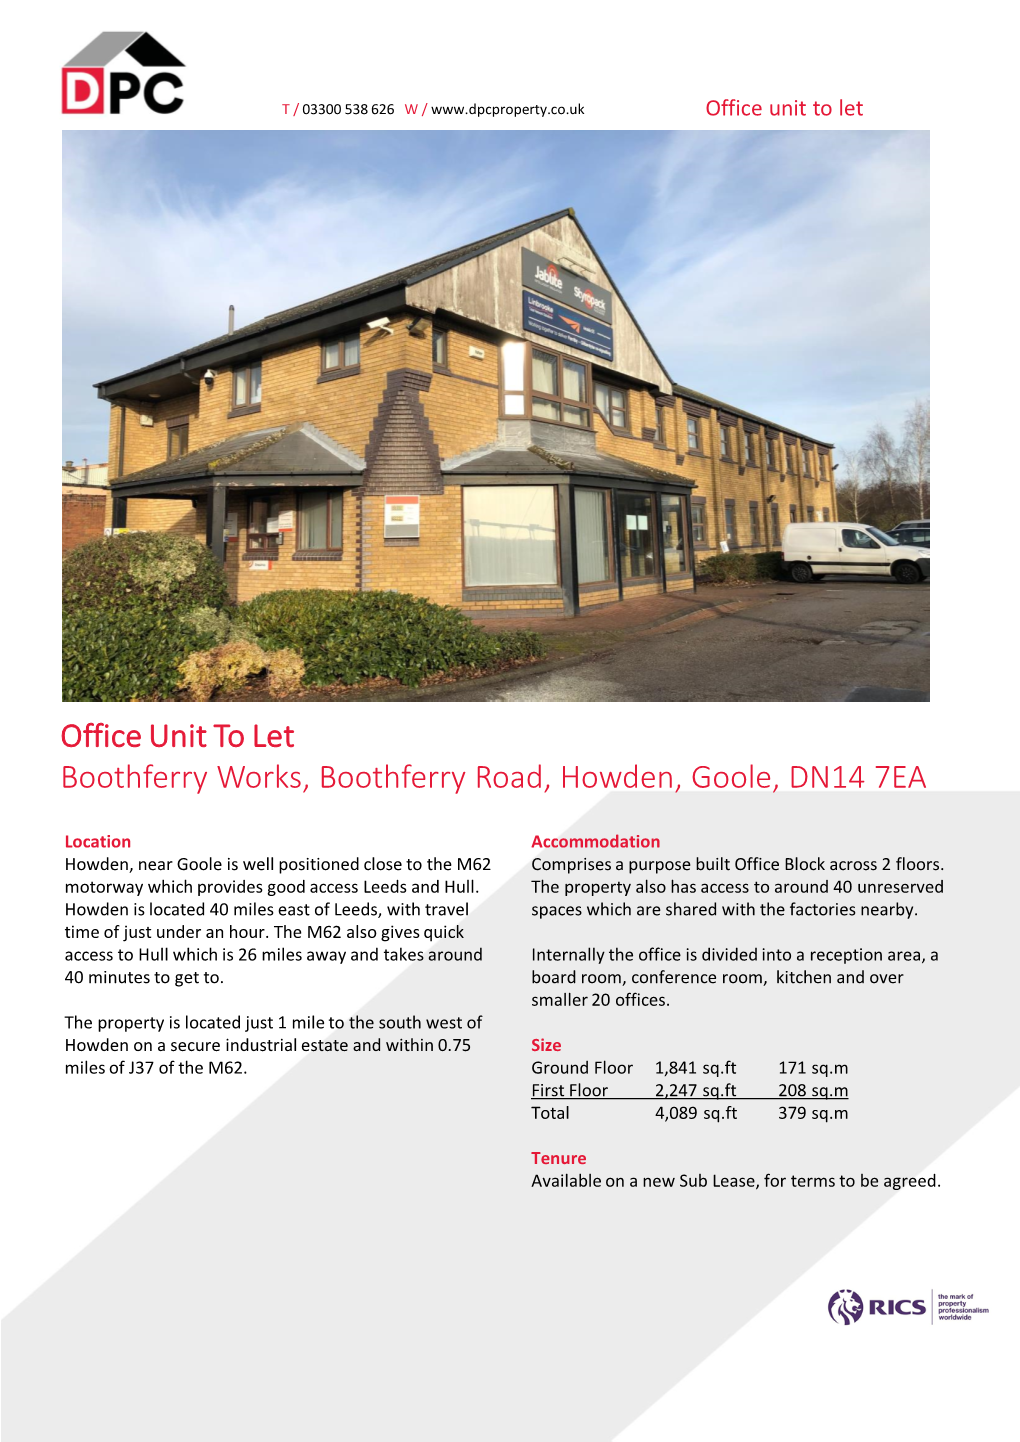 Office Unit to Let Boothferry Works, Boothferry Road, Howden, Goole, DN14 7EA